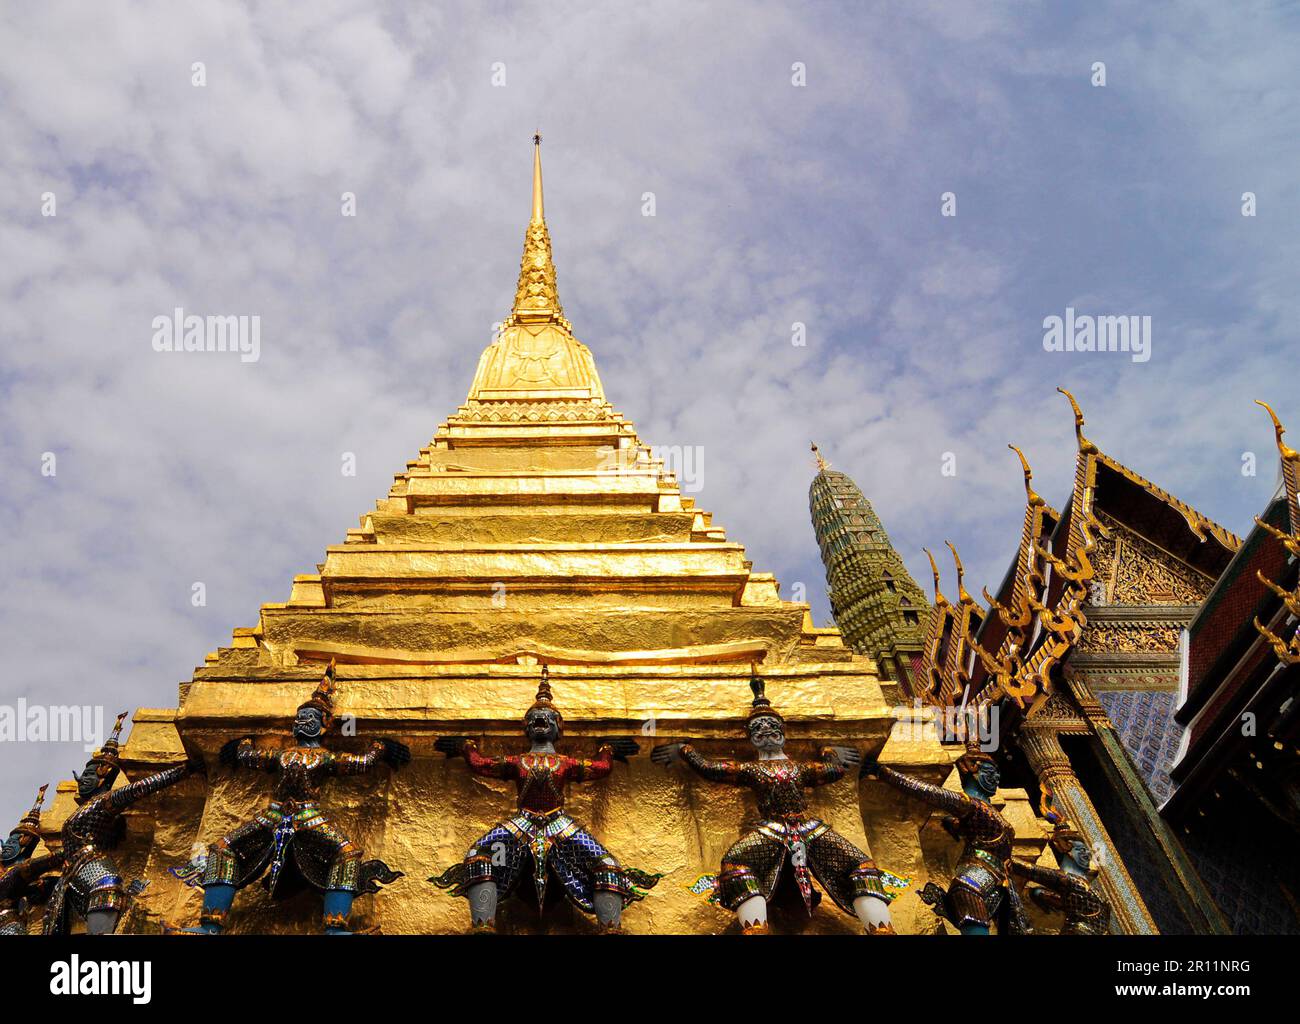 Mythical creatures supporting the golden pagoda at the Grand Palace in Bangkok, Thailand. Stock Photo